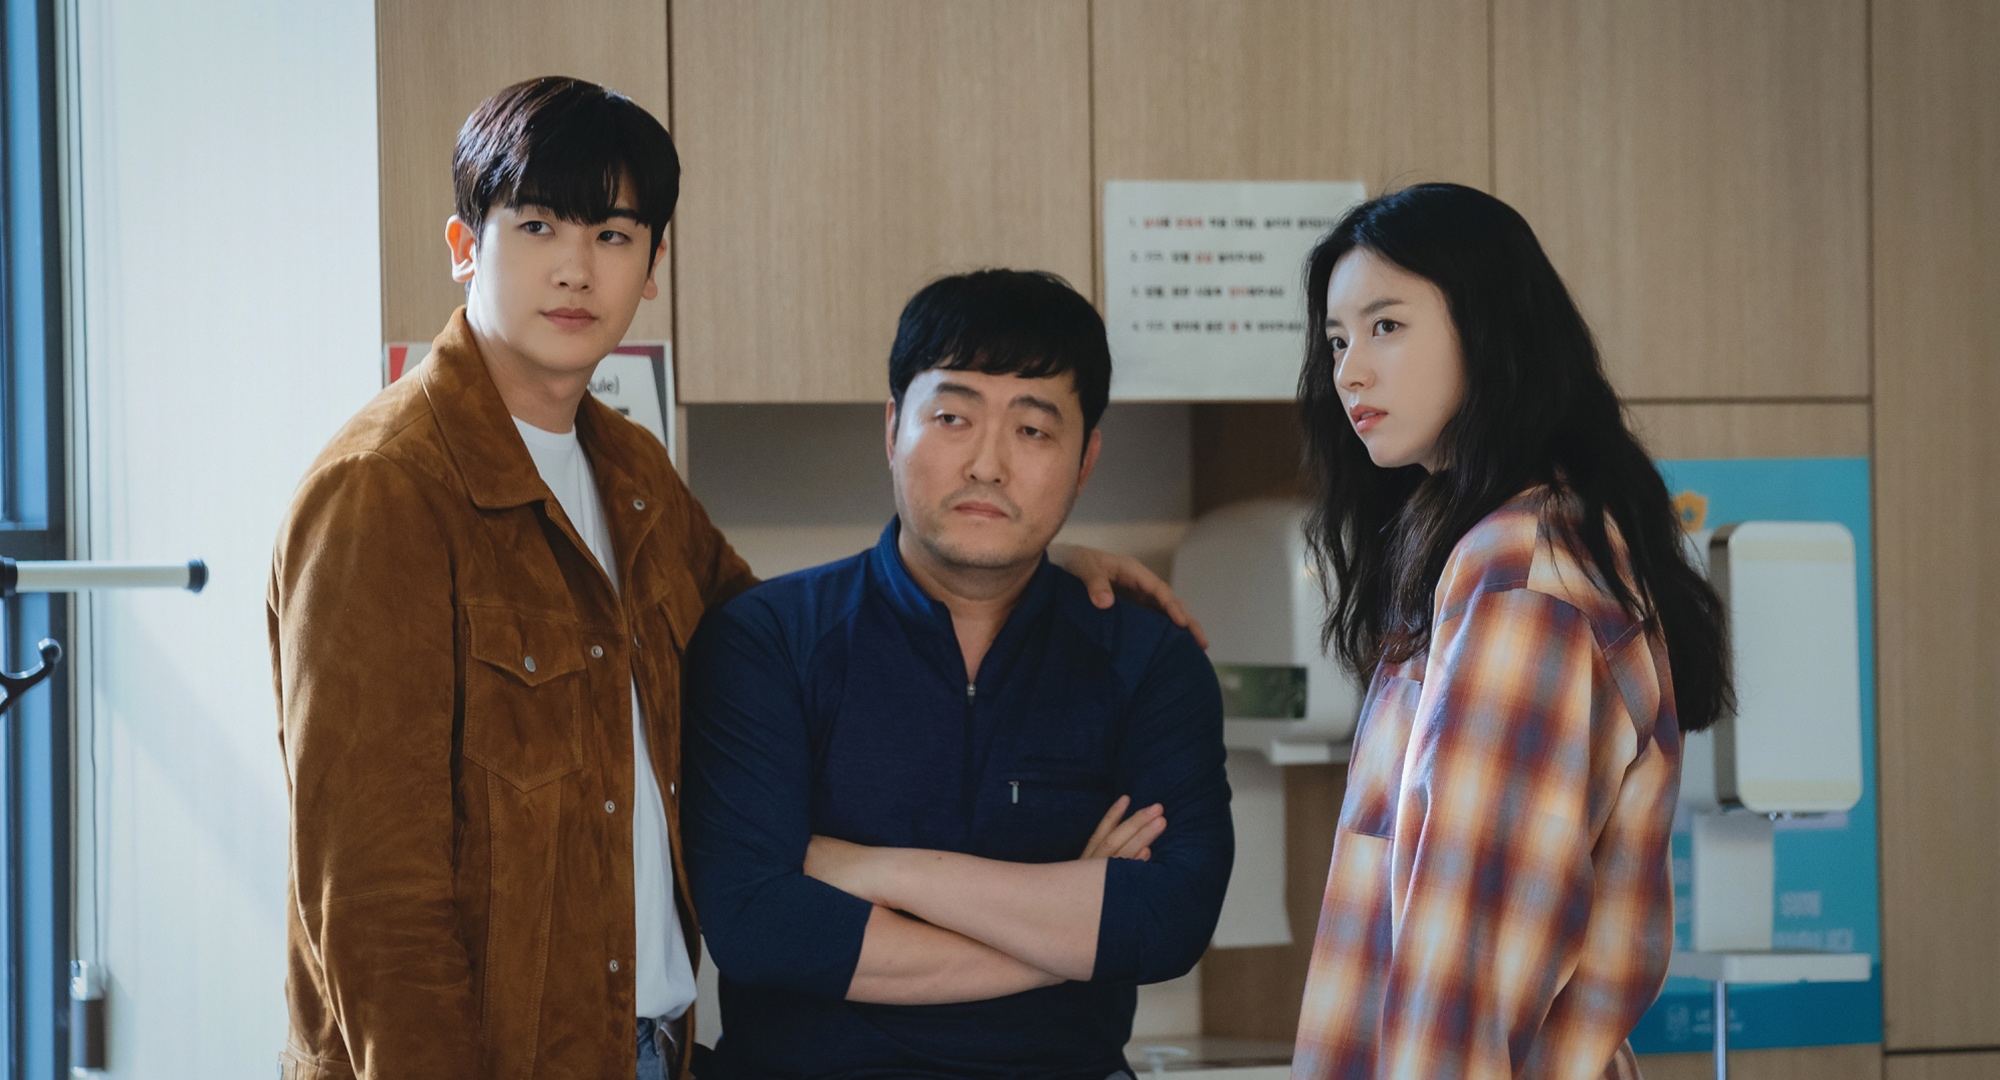 Happiness Episode 11 Release Date, Spoiler, Recap, And Where To Watch